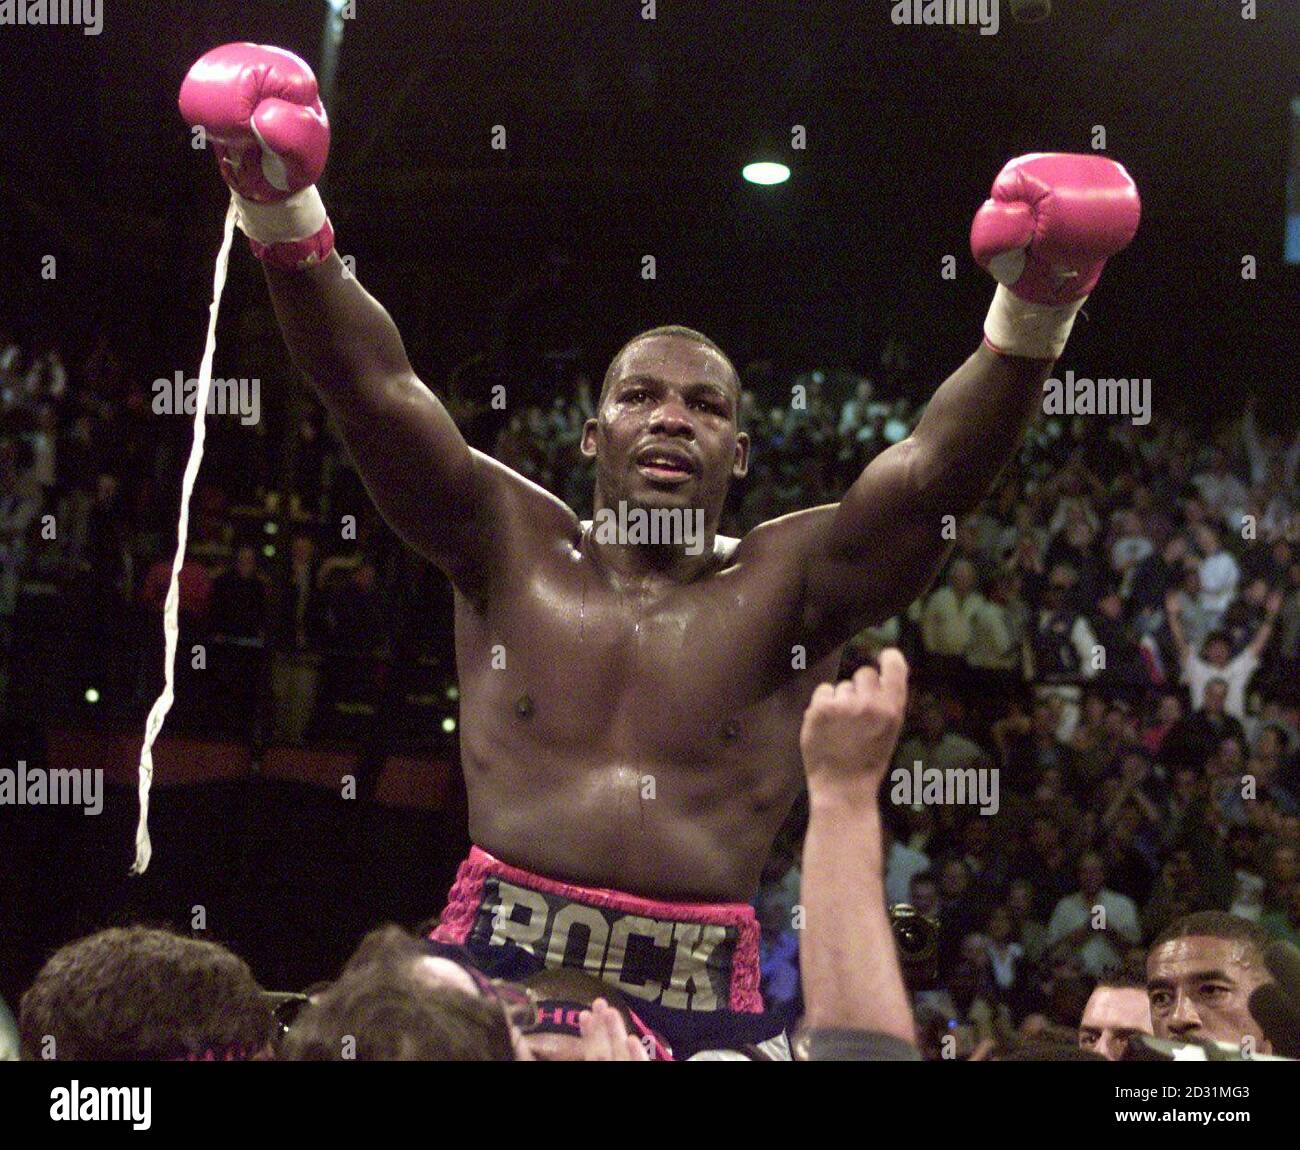 Hasim Rahman is held high above the ring by his corner men during the World Heavyweight Title fight at Carnival City, Johannesburg. Rahman knocked out Britain's Lennox Lewis in the fifth round to become the new WBC/IBF/IBO Heavyweight Champion. * R/I: 25/04/01. 18/11/01: Britain's Lennox Lewis knocked out American Hasim Rahman in the fourth round in a rematch at Mandalay Bay Hotel, Las Vegas, USA. Stock Photo